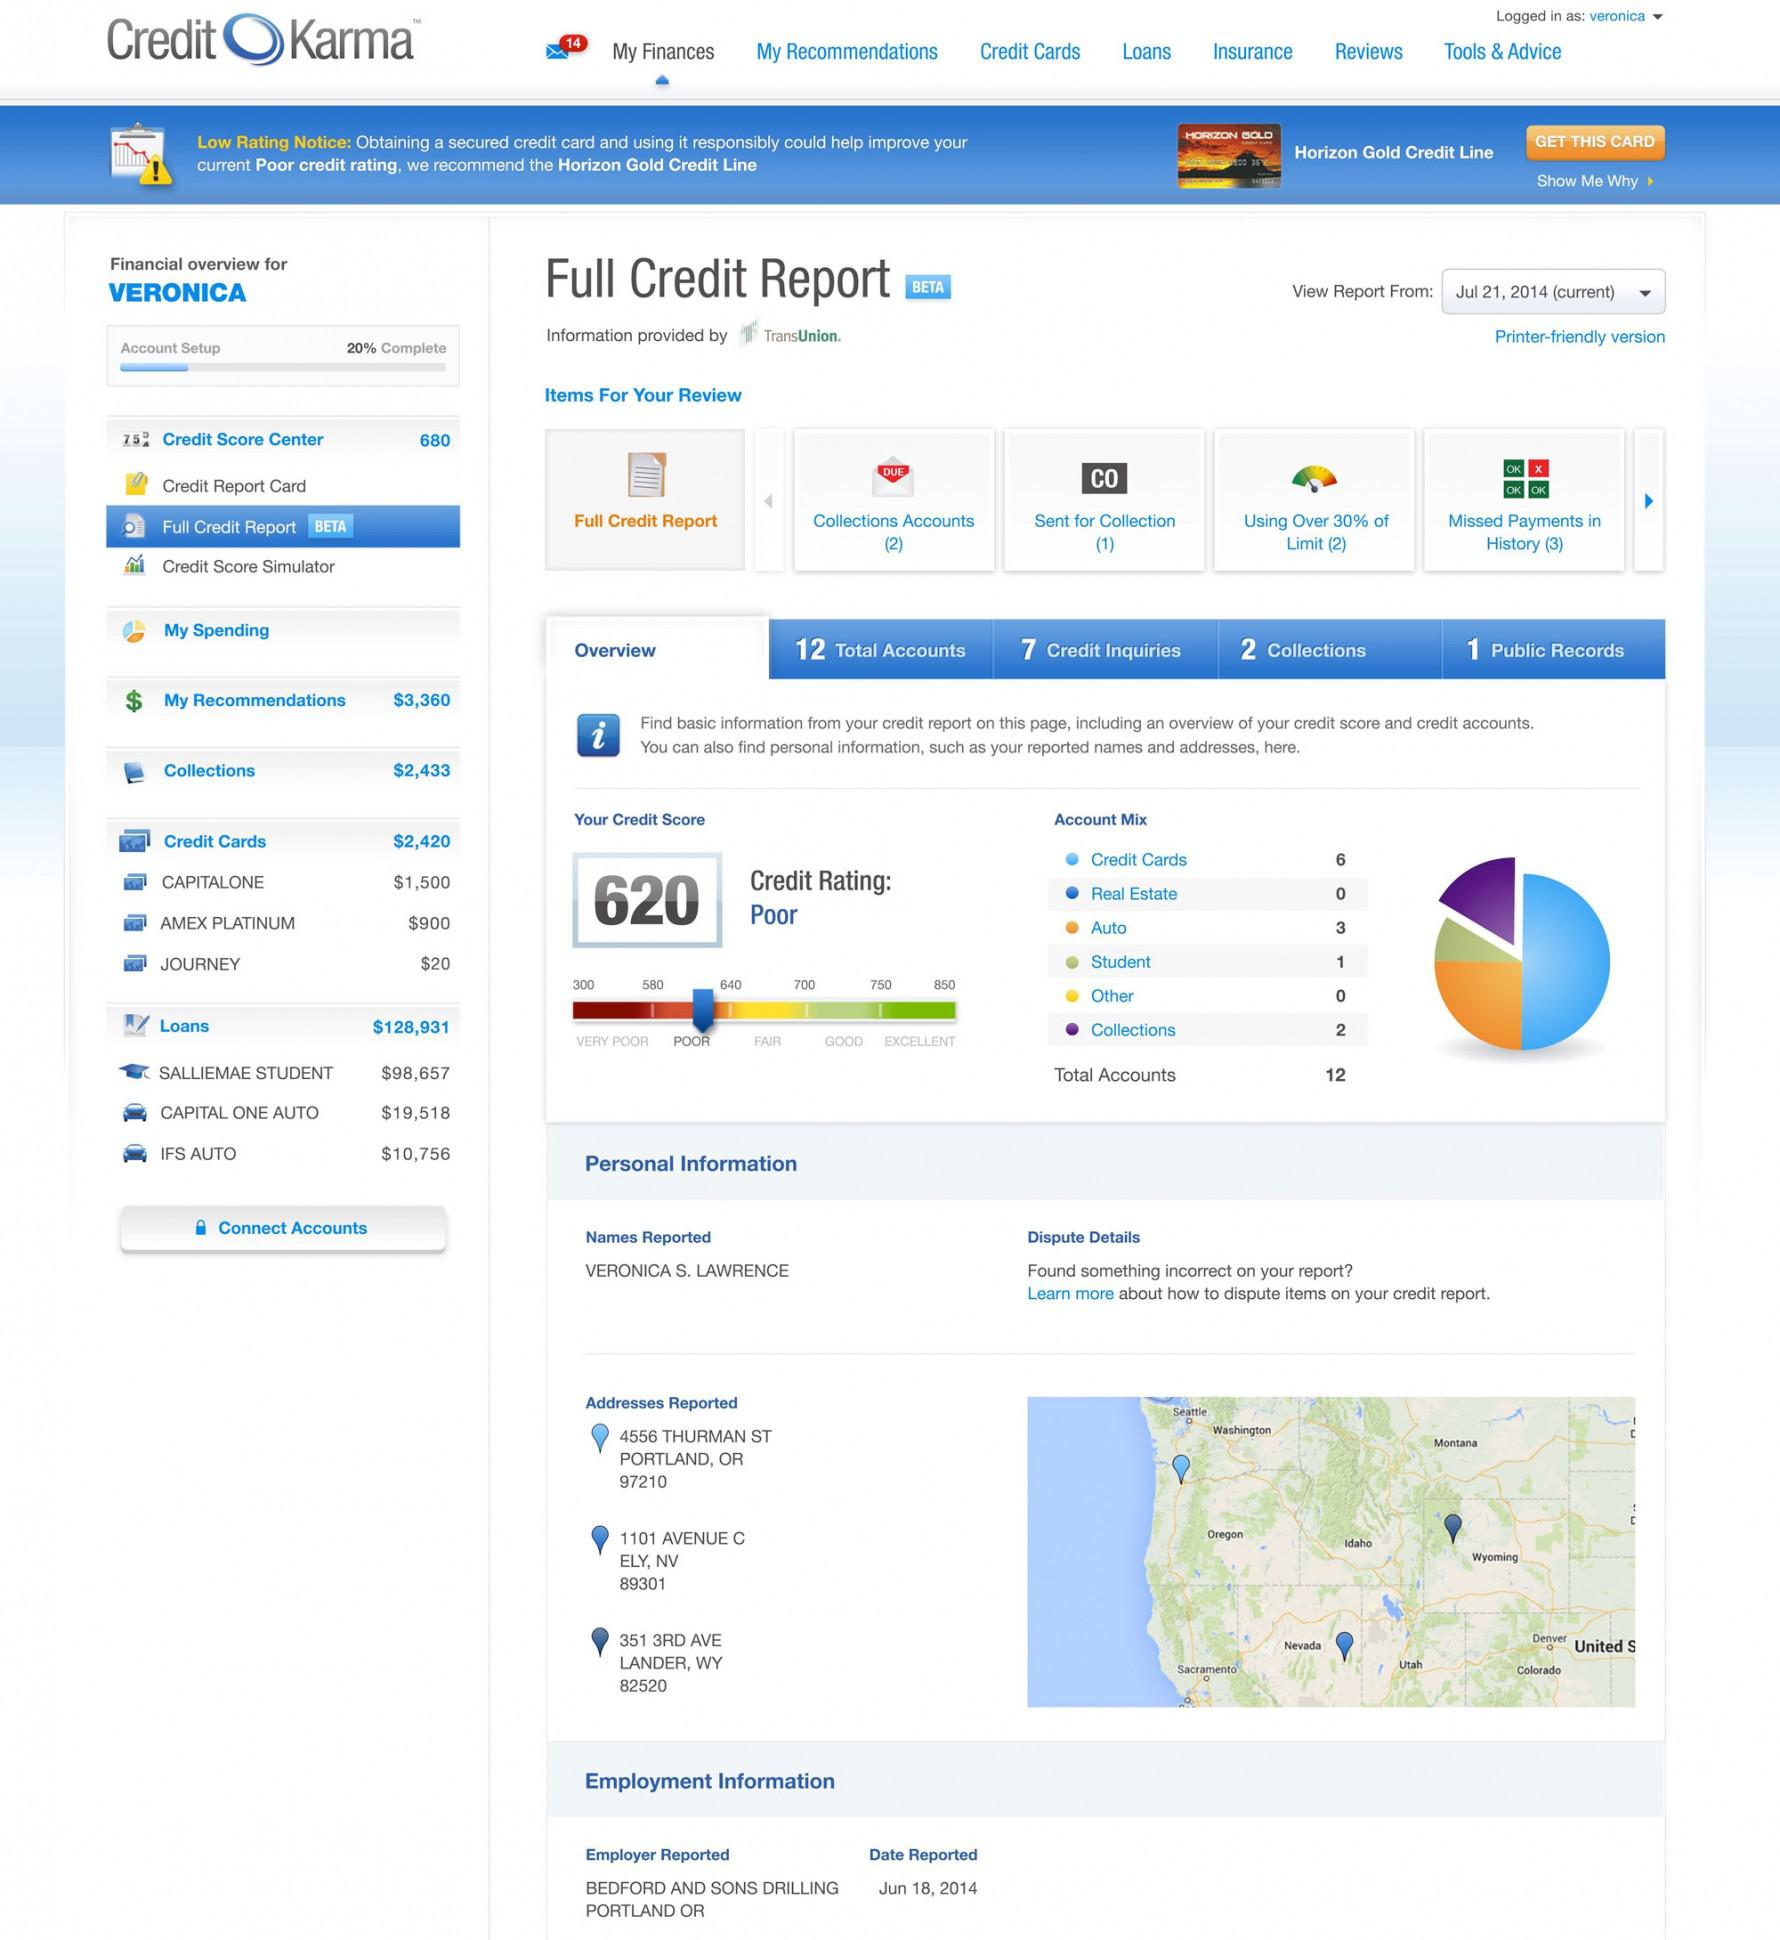 Credit Karma Now Has Free Weekly Credit Reports, Without A Catch